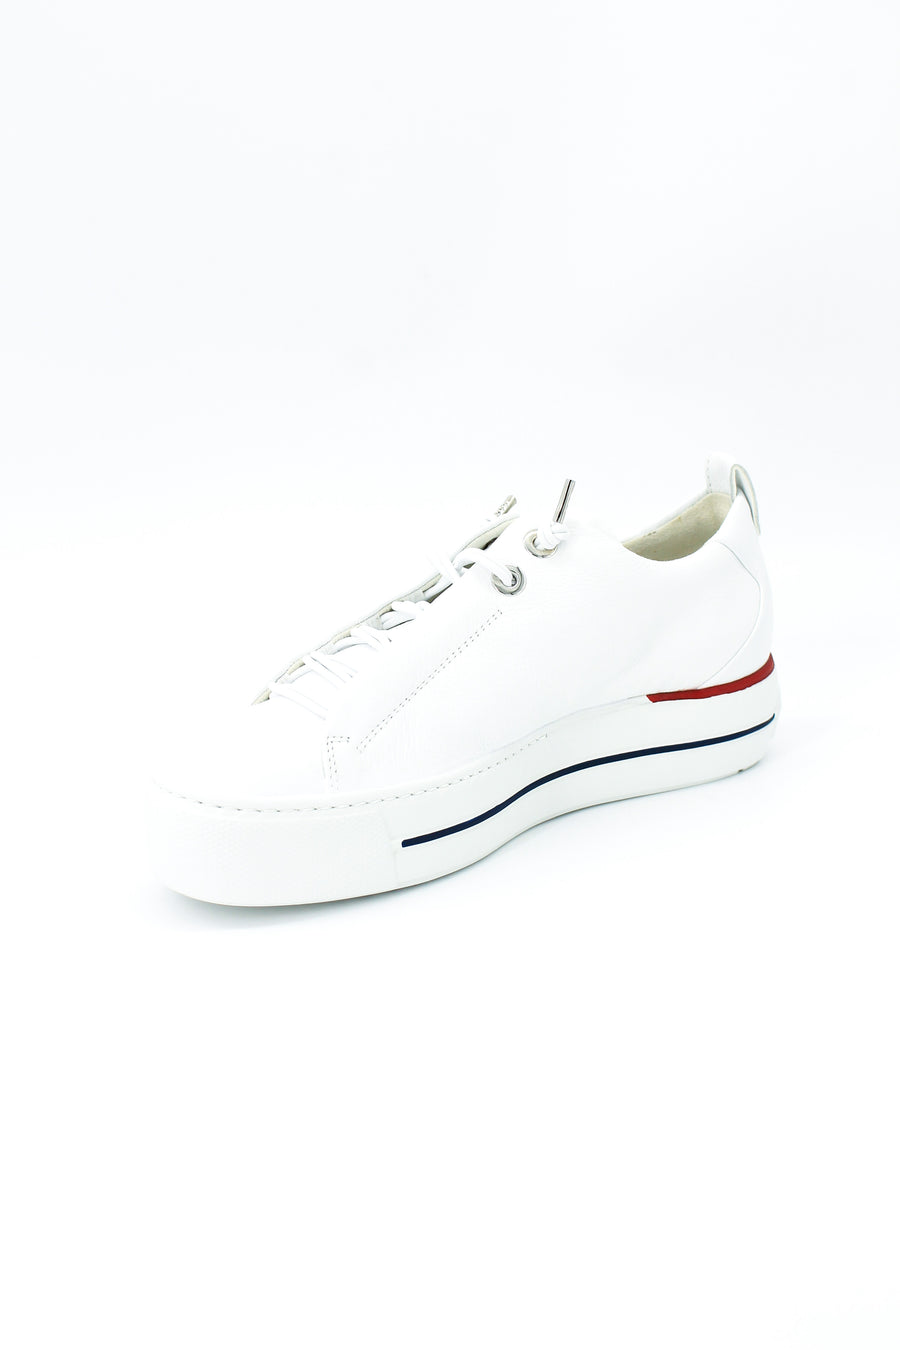 Paul Green 5017 White/Red/Blue